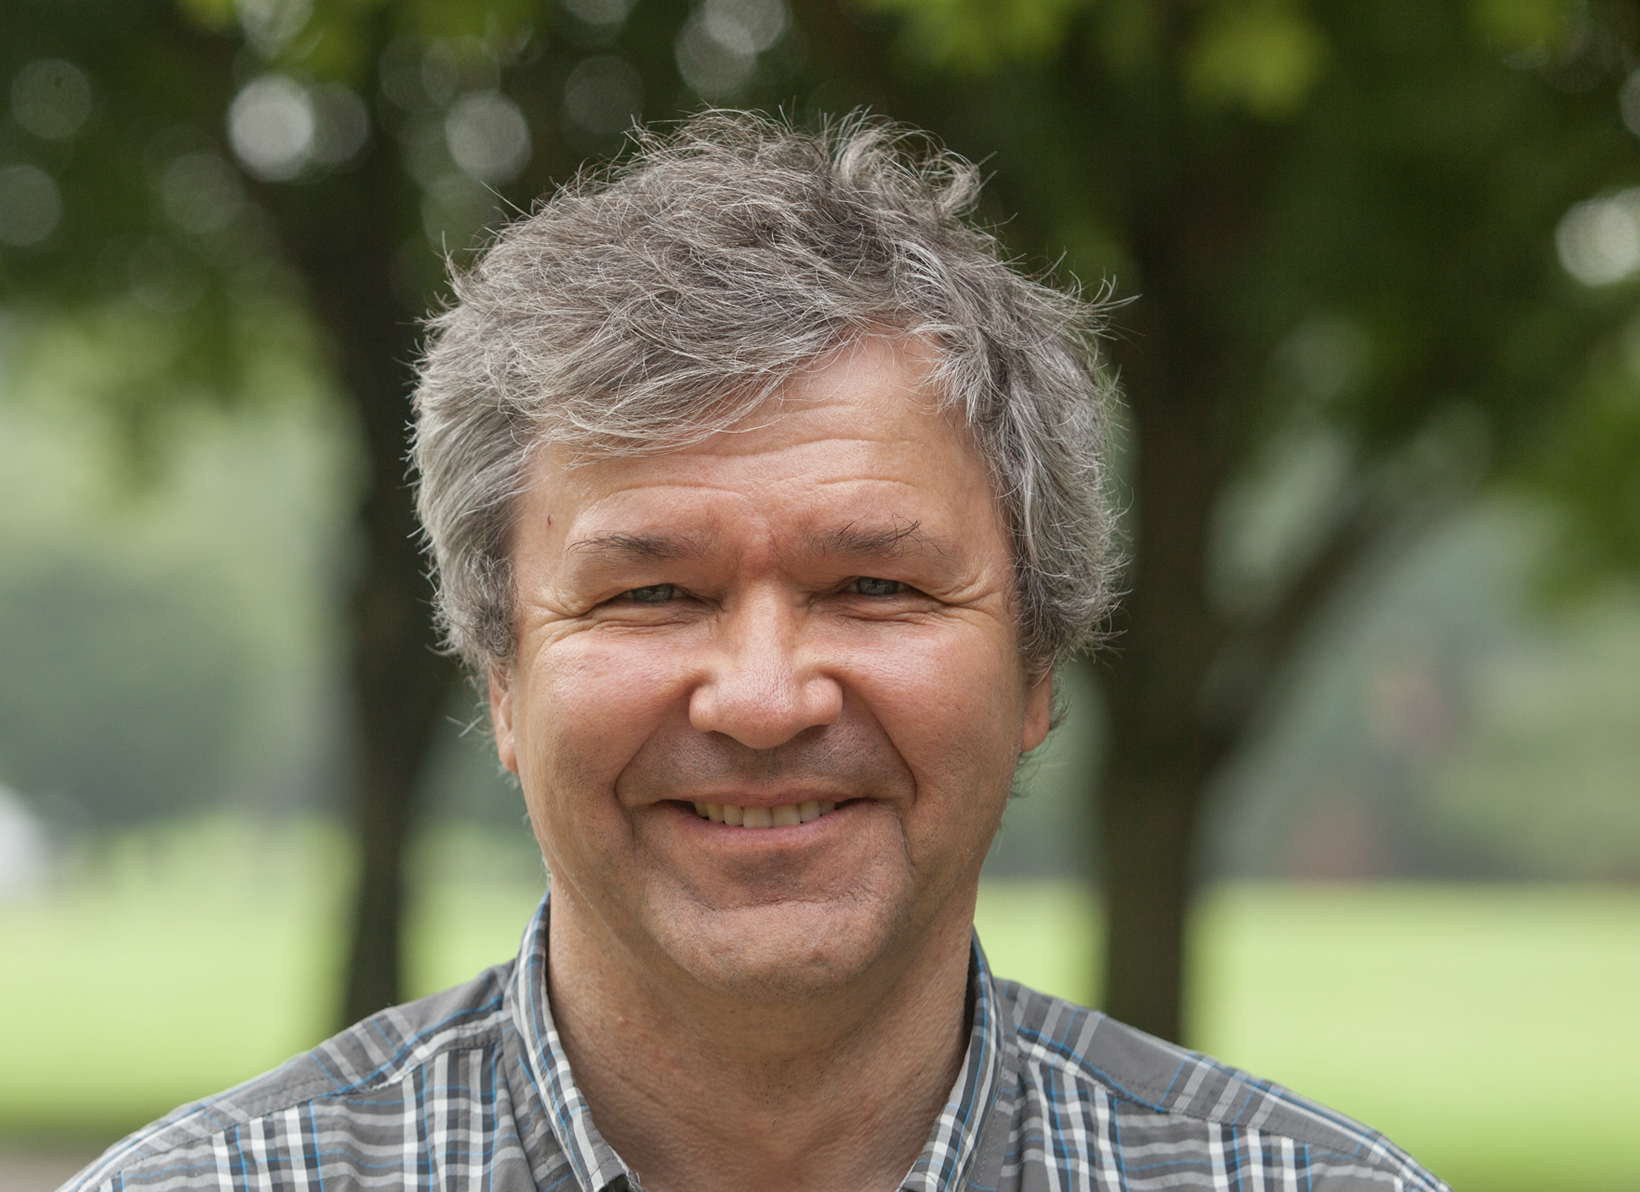 Assistant Professor of Biology Eugene Potapov at Bryn Athyn College